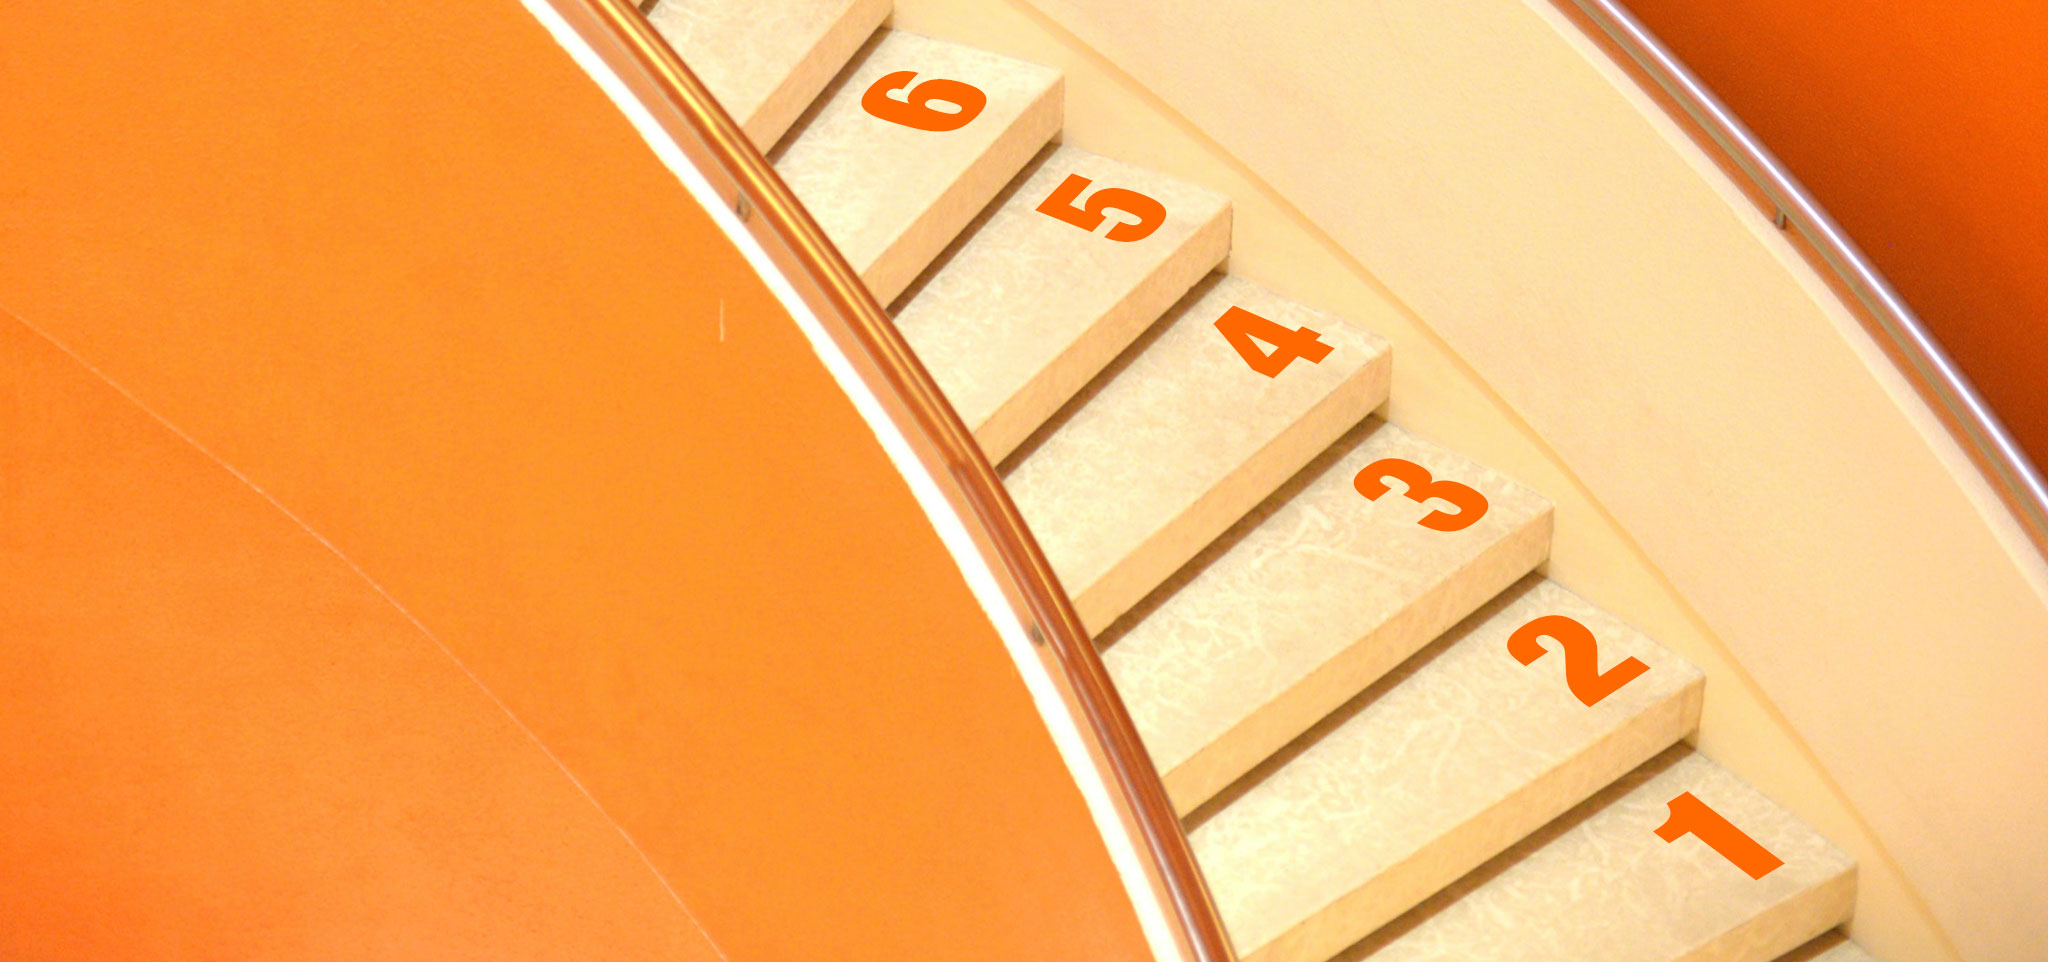 Photo of he steps in a spral staircase with orange walls